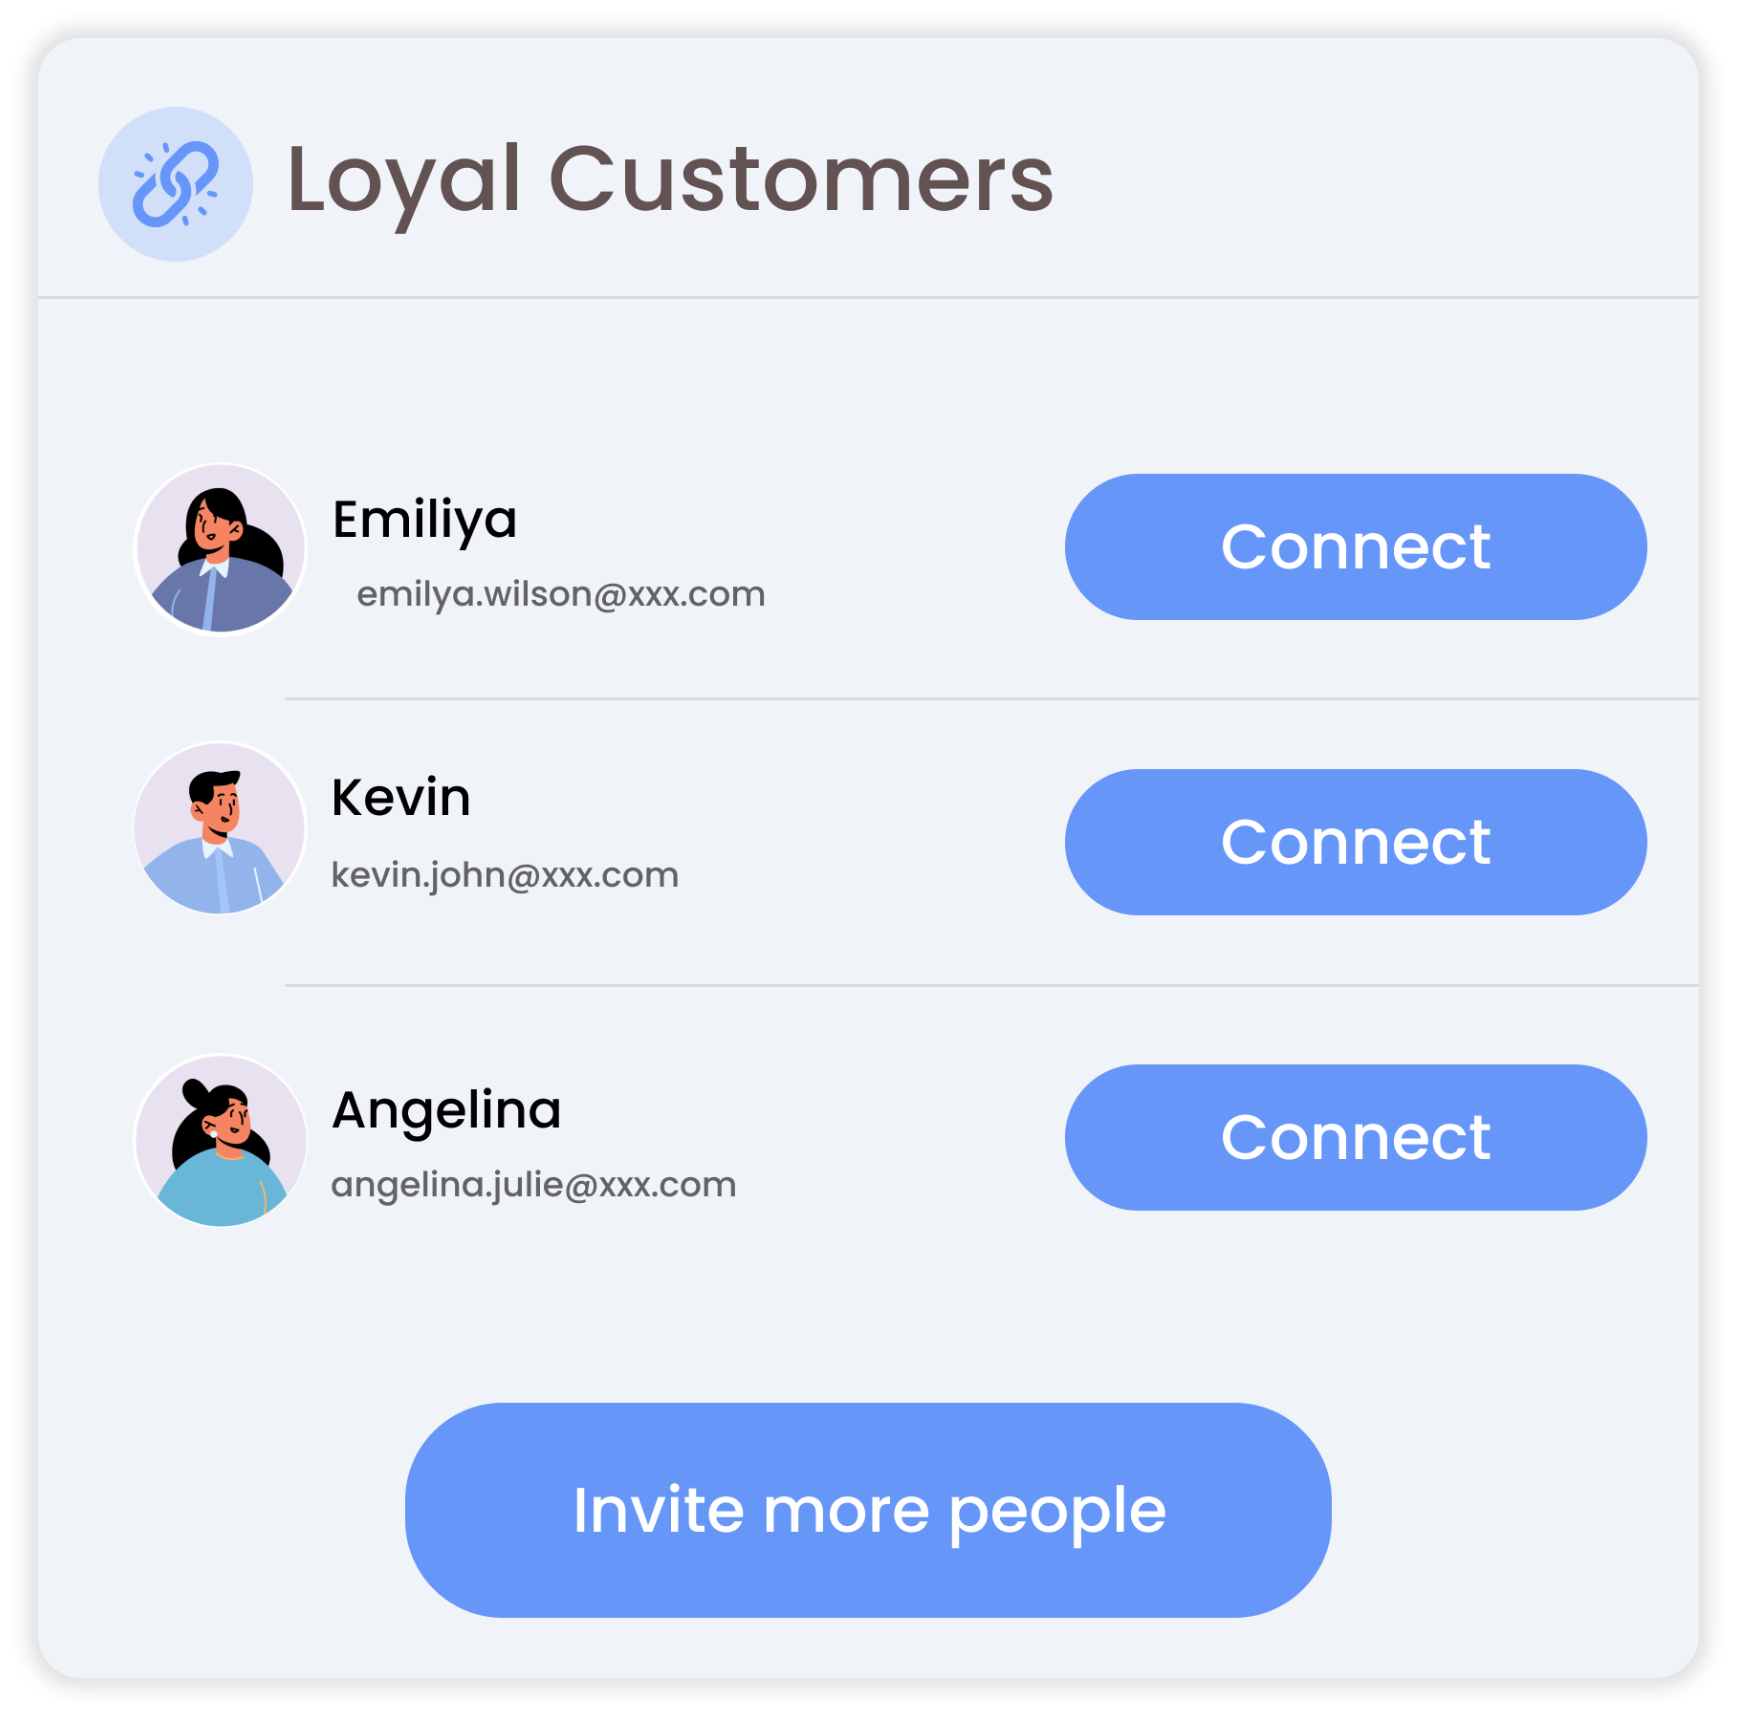 Sell with loyalty communities